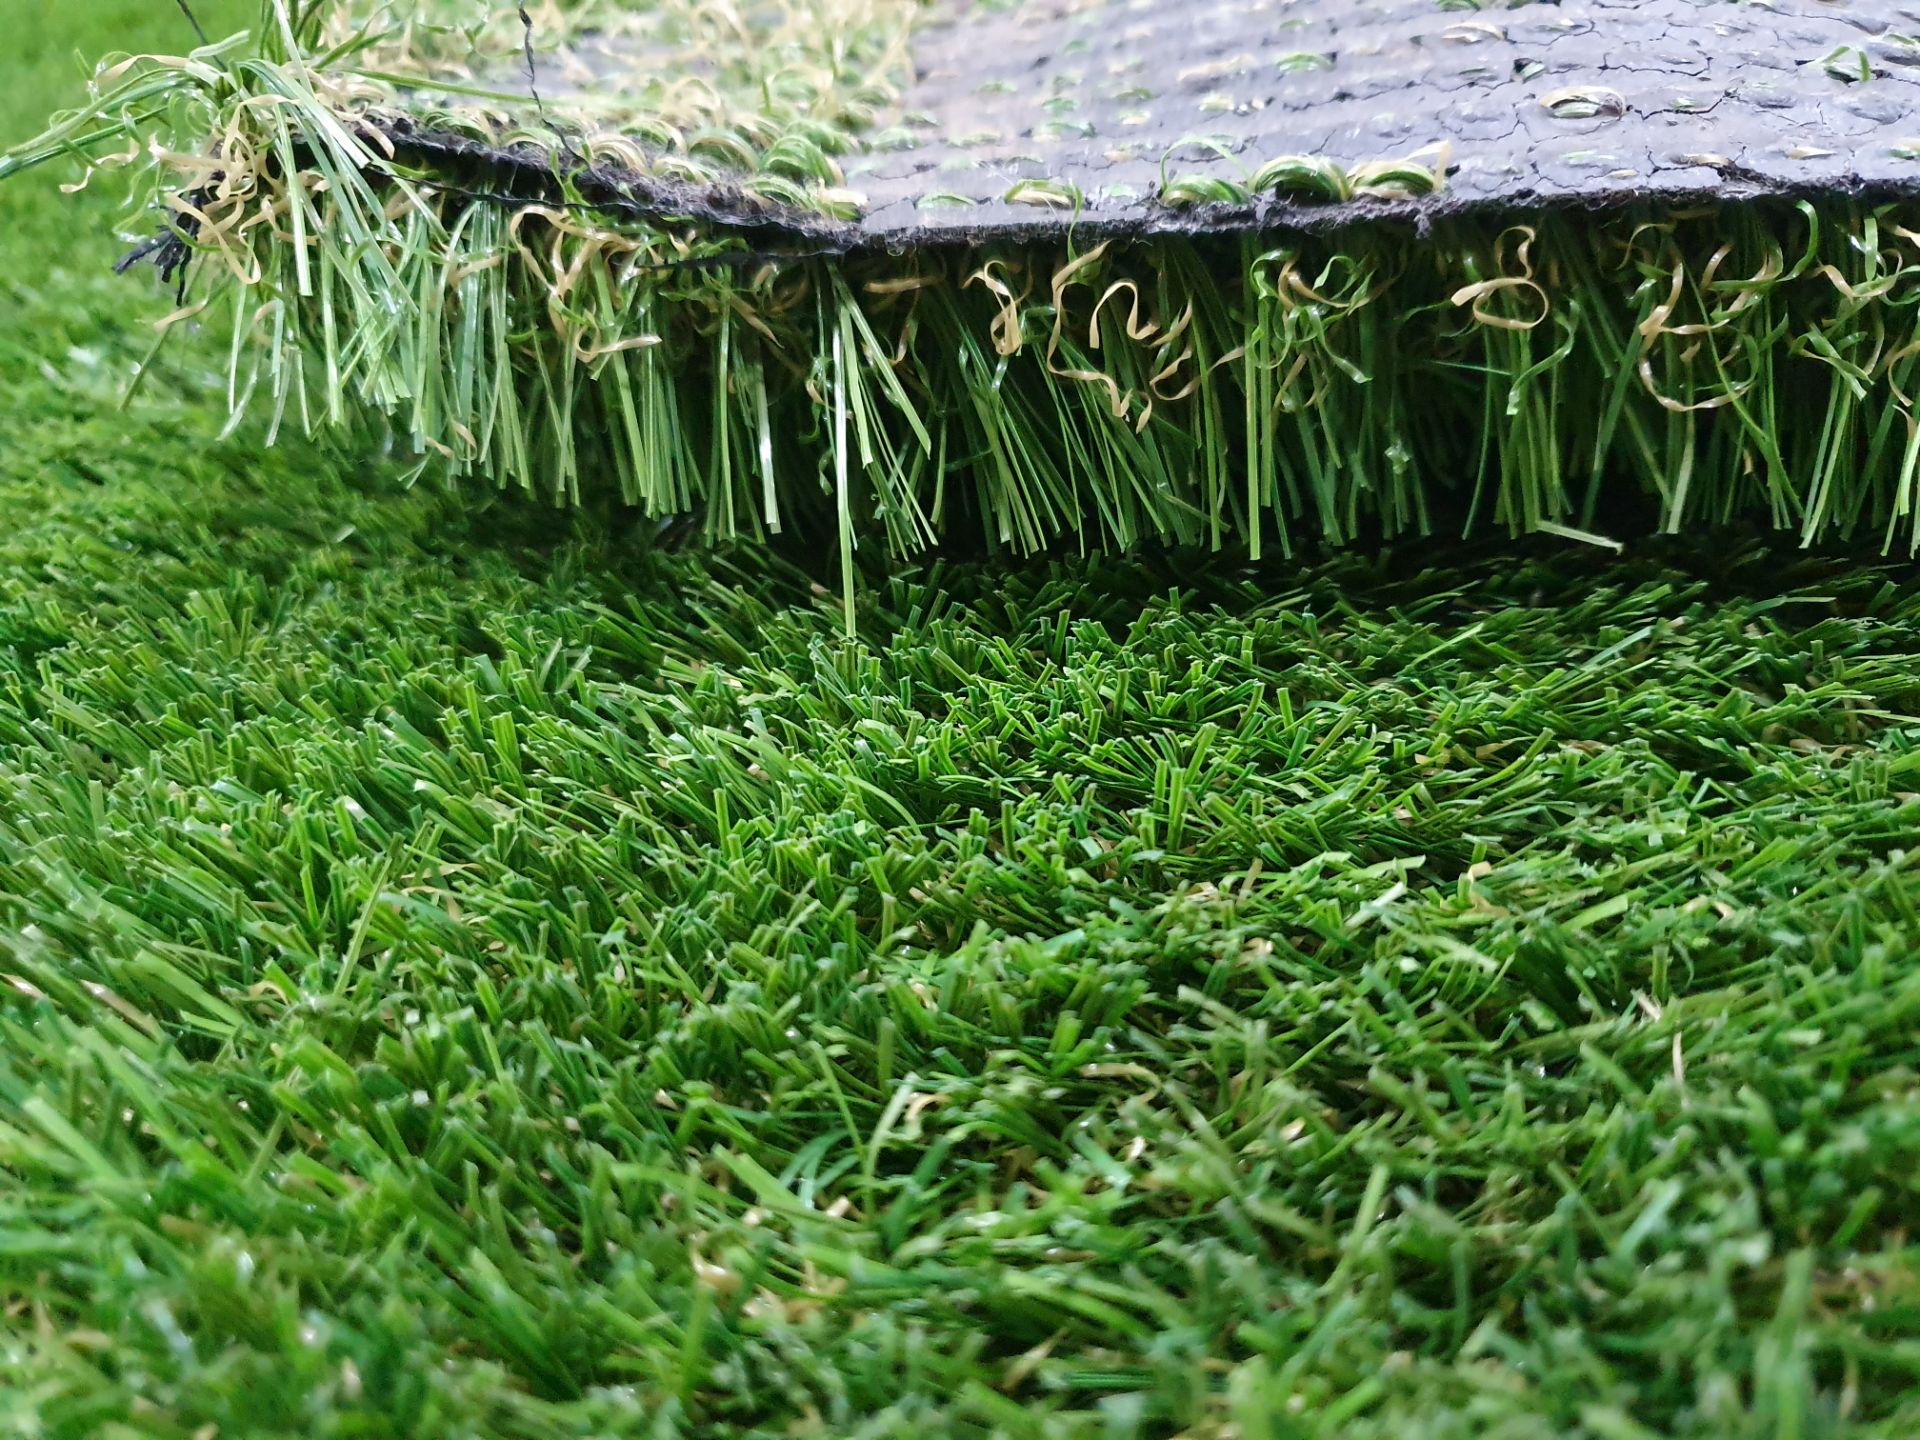 Roll of Green Artificial Grass | Approximate size: 2m x 3m - Image 2 of 2